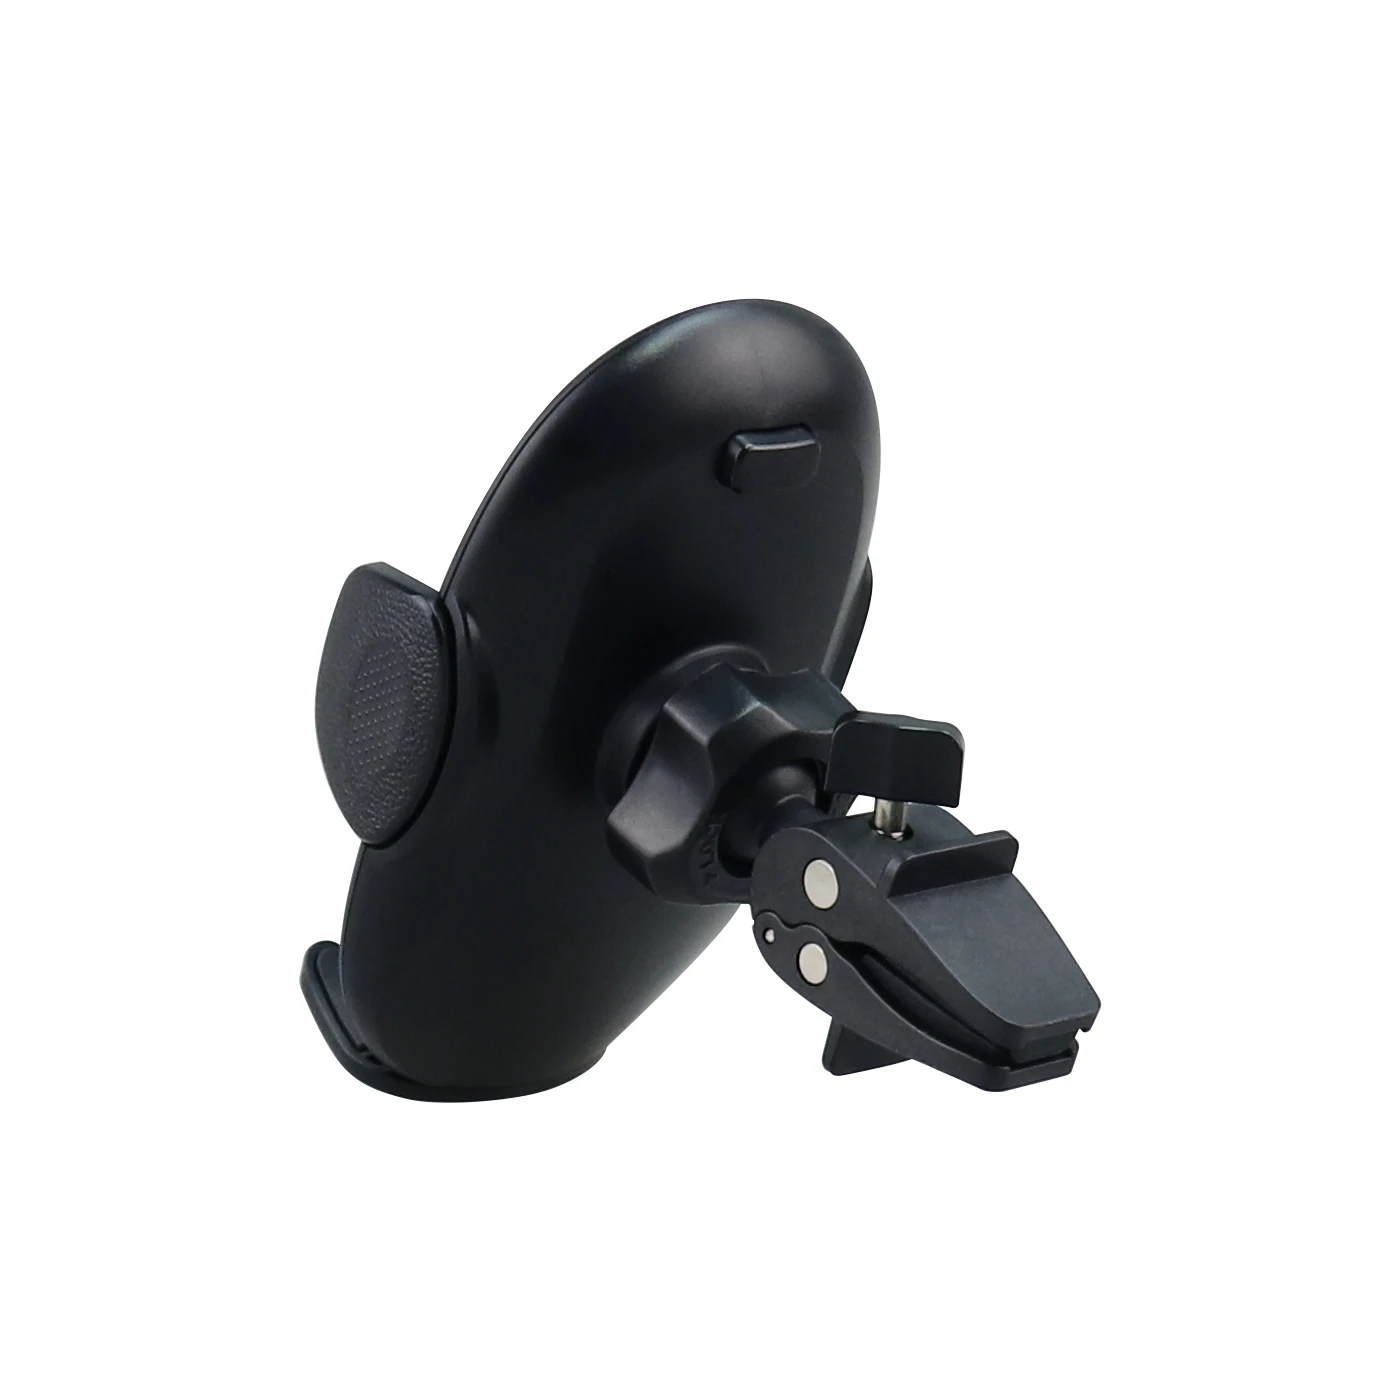 Chuanglong New Arrival Knob-Type Clip Adjustable Mobile Air Vent Car Phone Holder